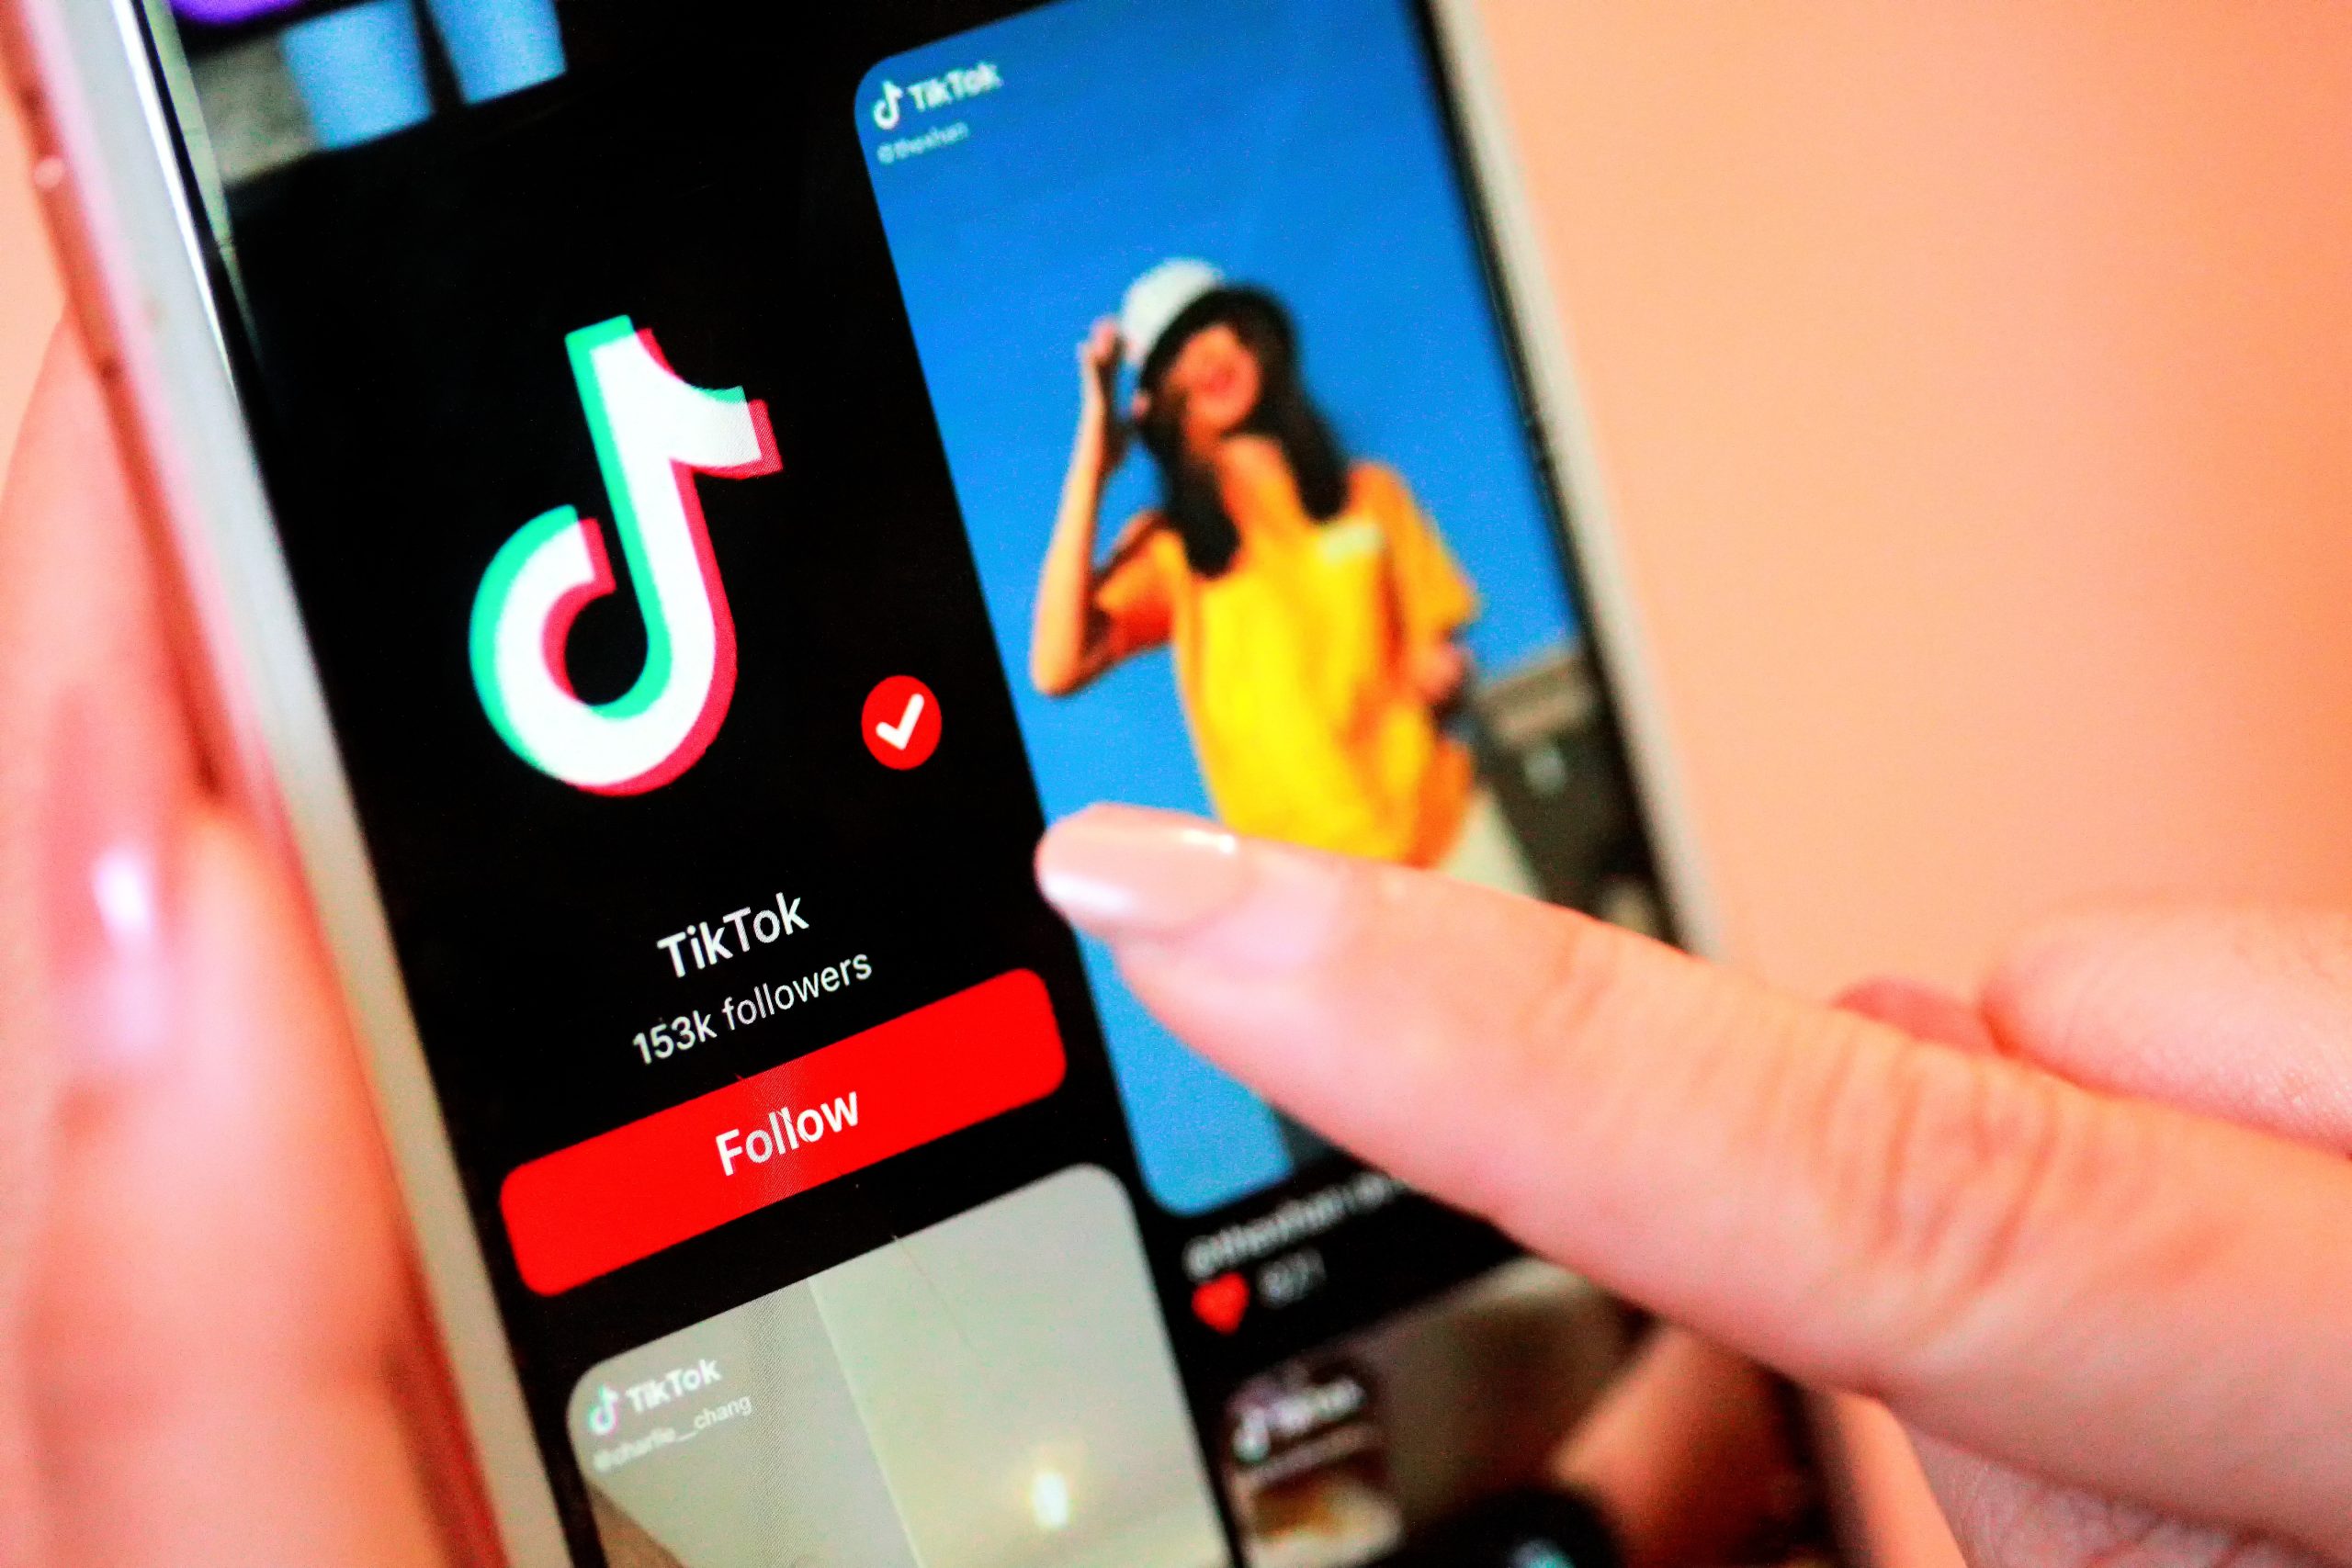 TikTok rolls out e-commerce operation in the US despite political challenges · TechNode #chicomnews